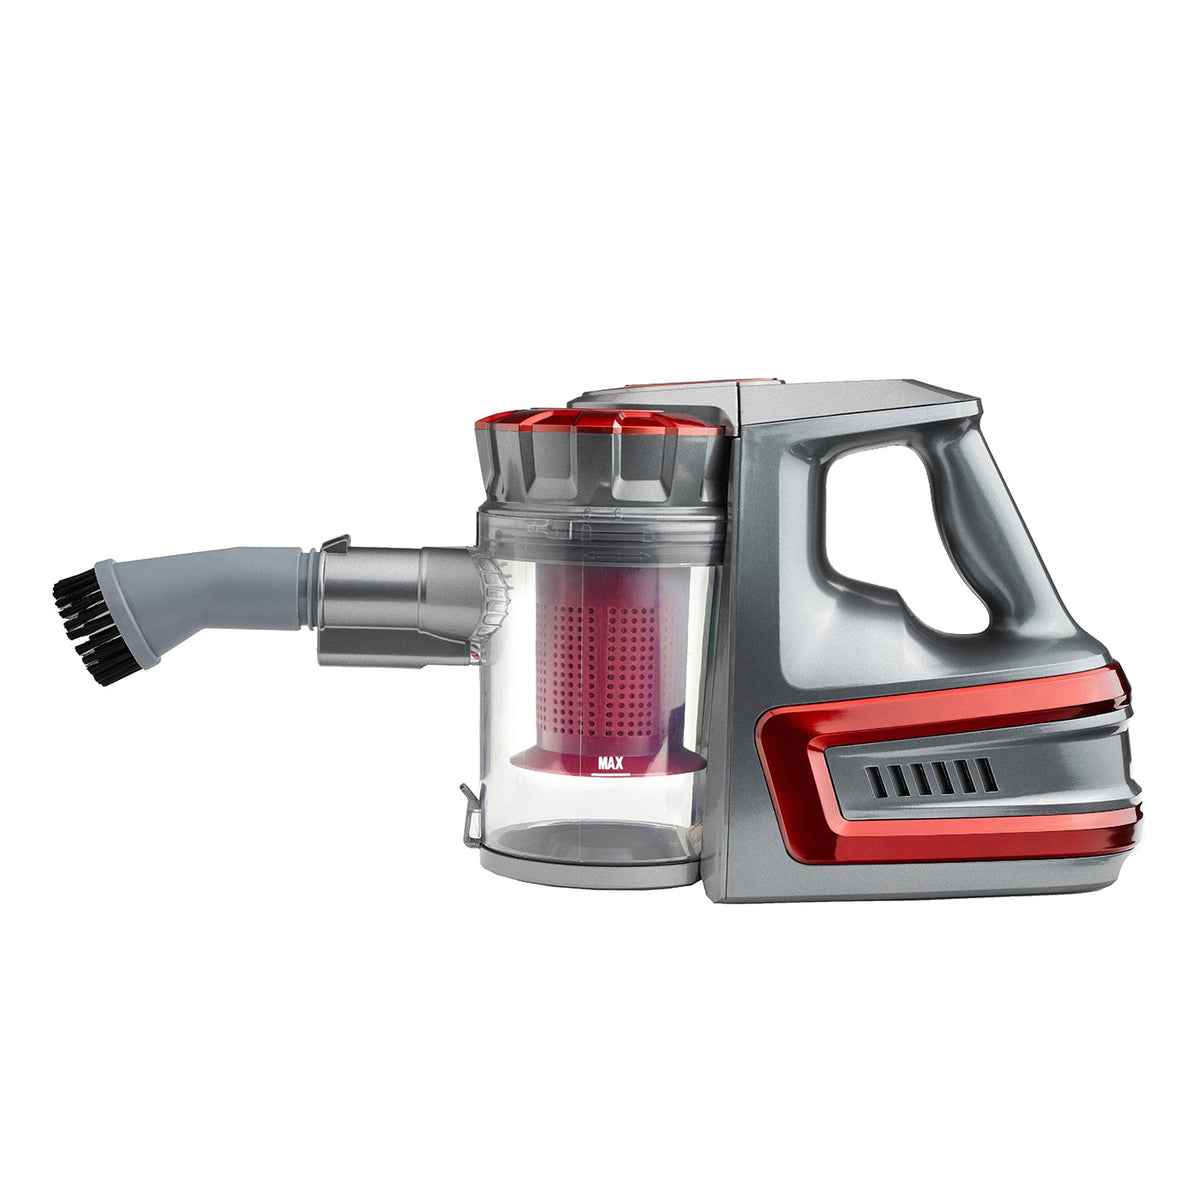 Rechargeable Cordless Handheld Stick Vacuum Cleaner (Red/Grey) 150W